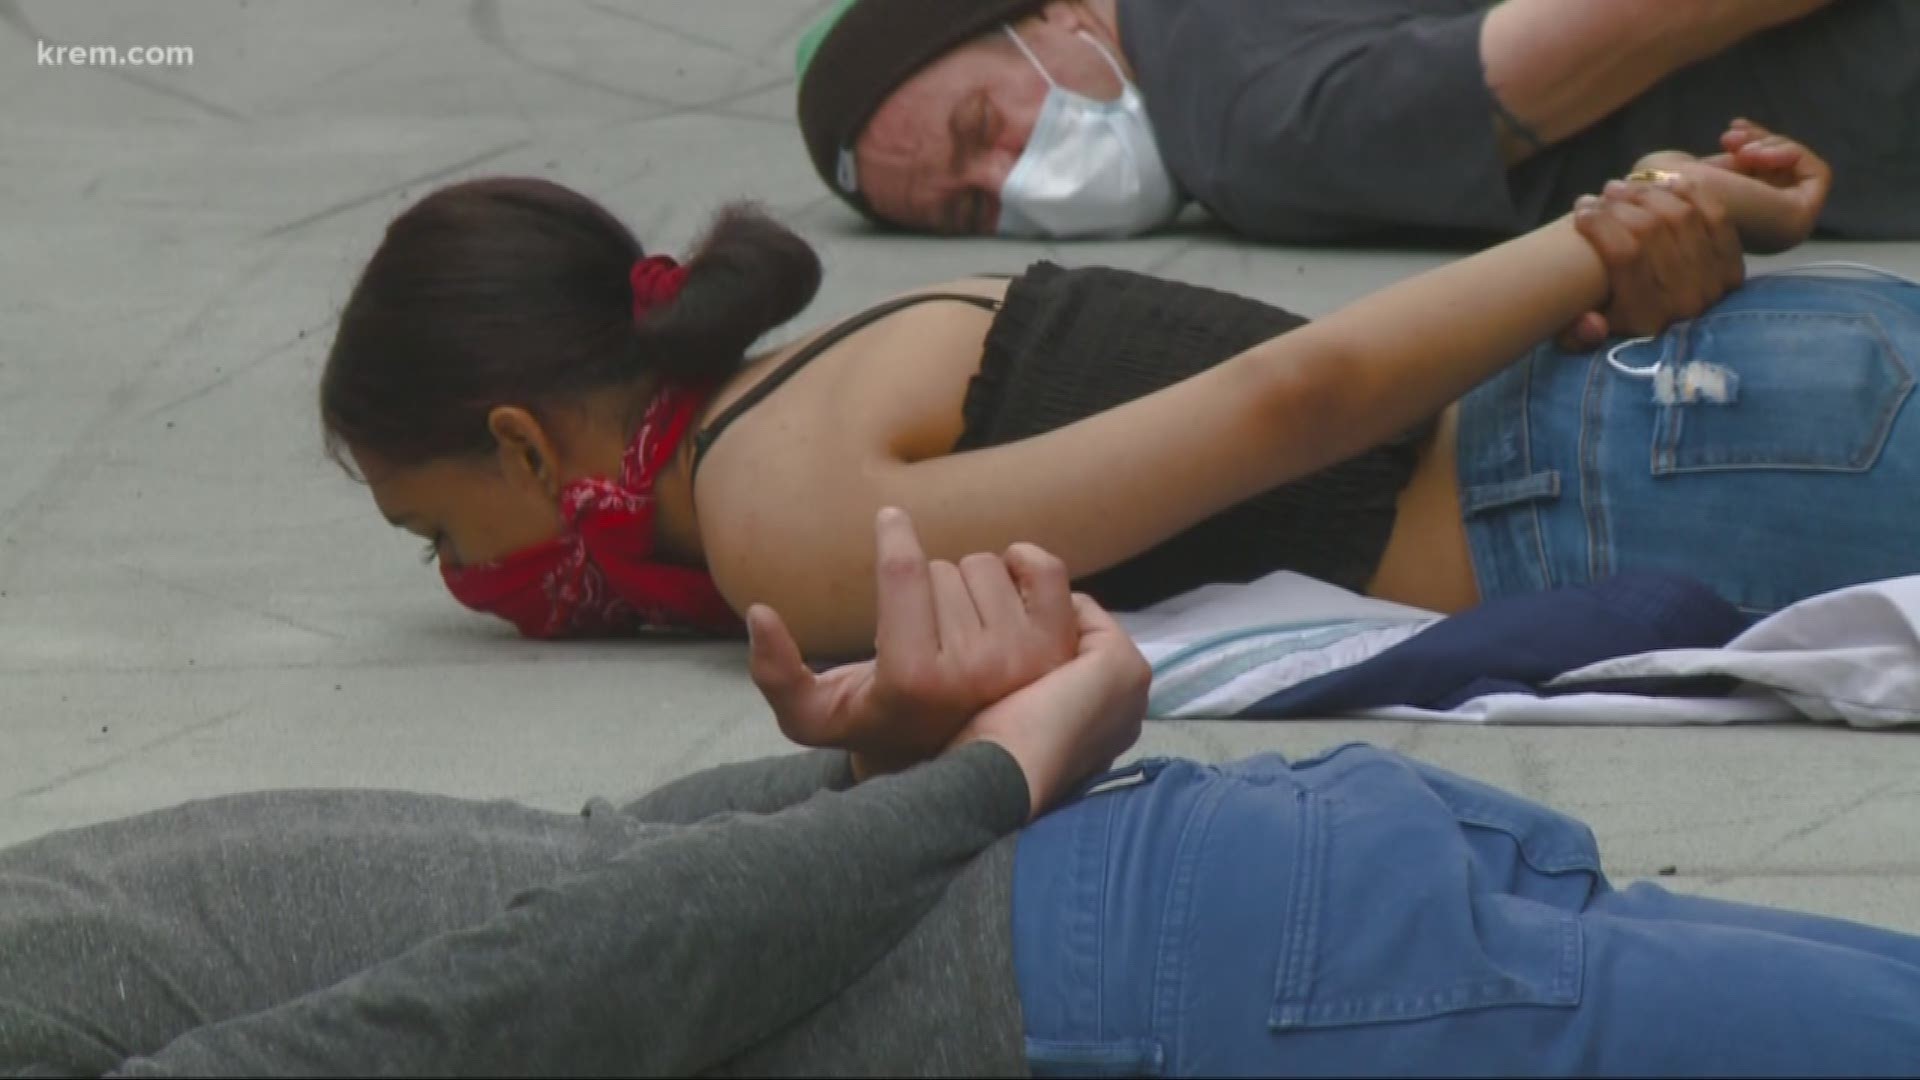 The protesters laid on the ground during the demonstration, with many putting their hands behind their back.